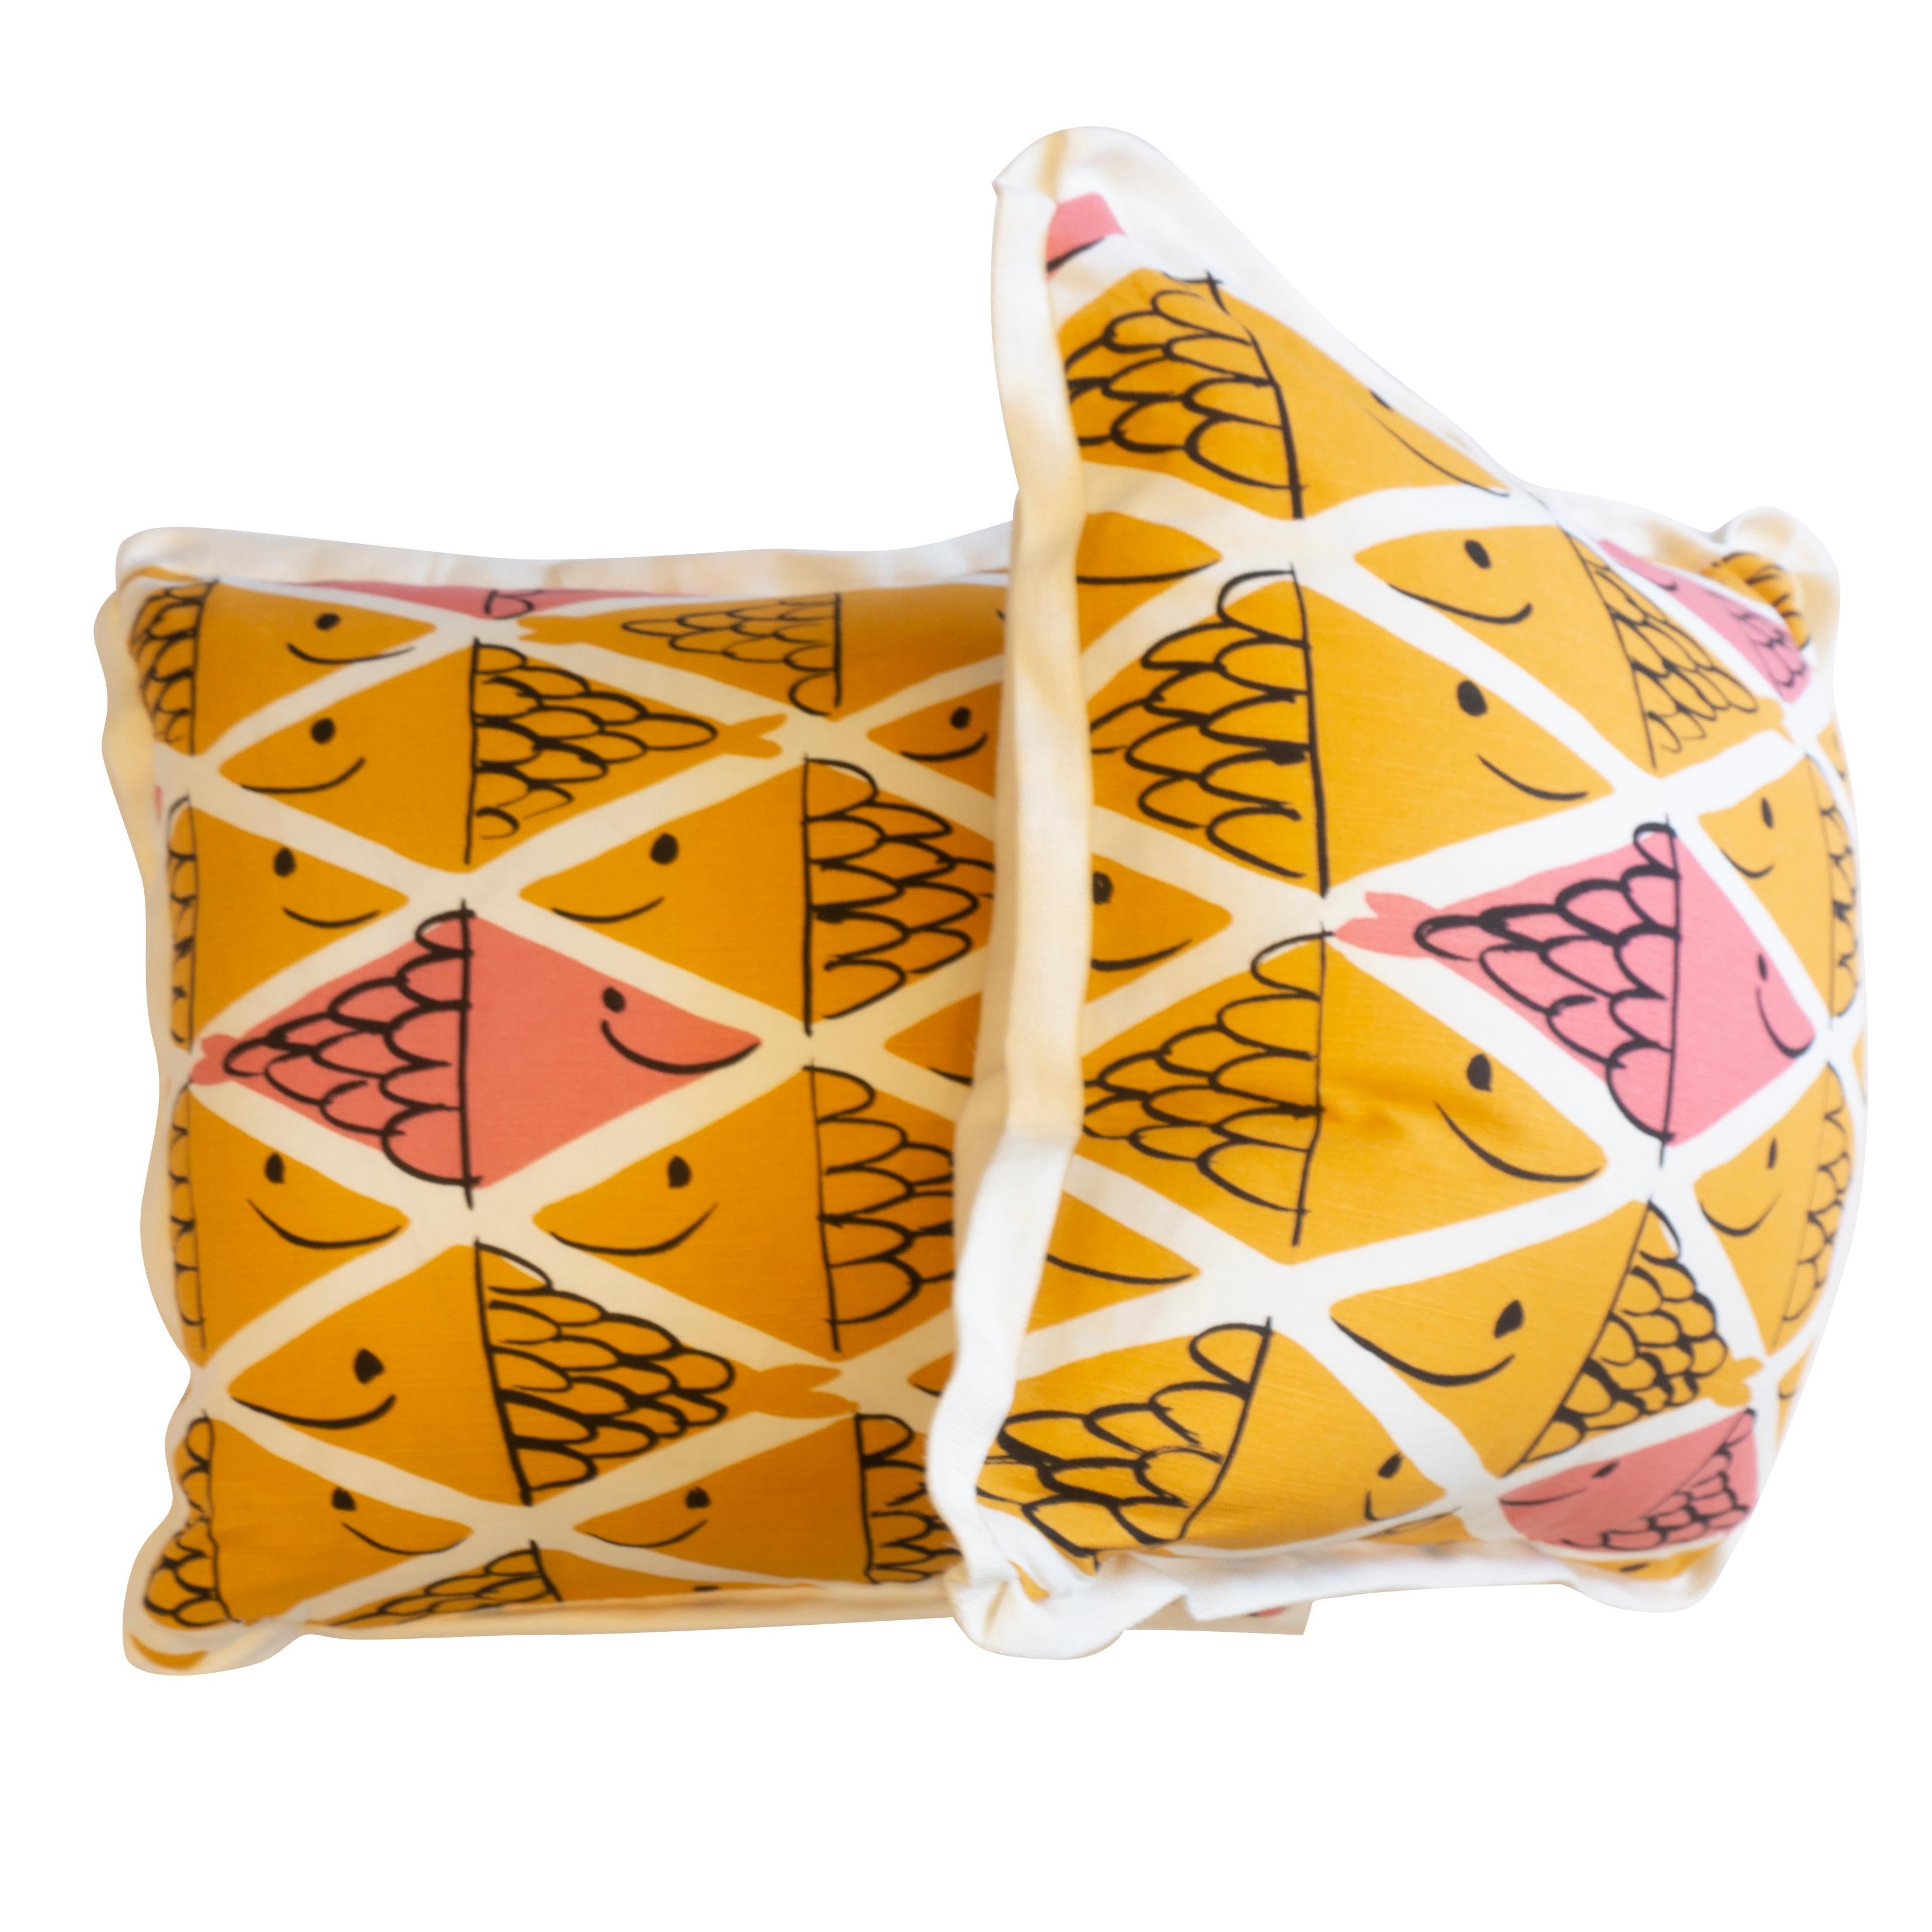 Our happy fish pillows are sure to put a smile on your face. The pillows feature a two-toned school of fish pattern by Vera Neumann for Schumacher. All pillows are handmade at our studio in Norwalk, CT. 

Measurements

22H” x 22”W.